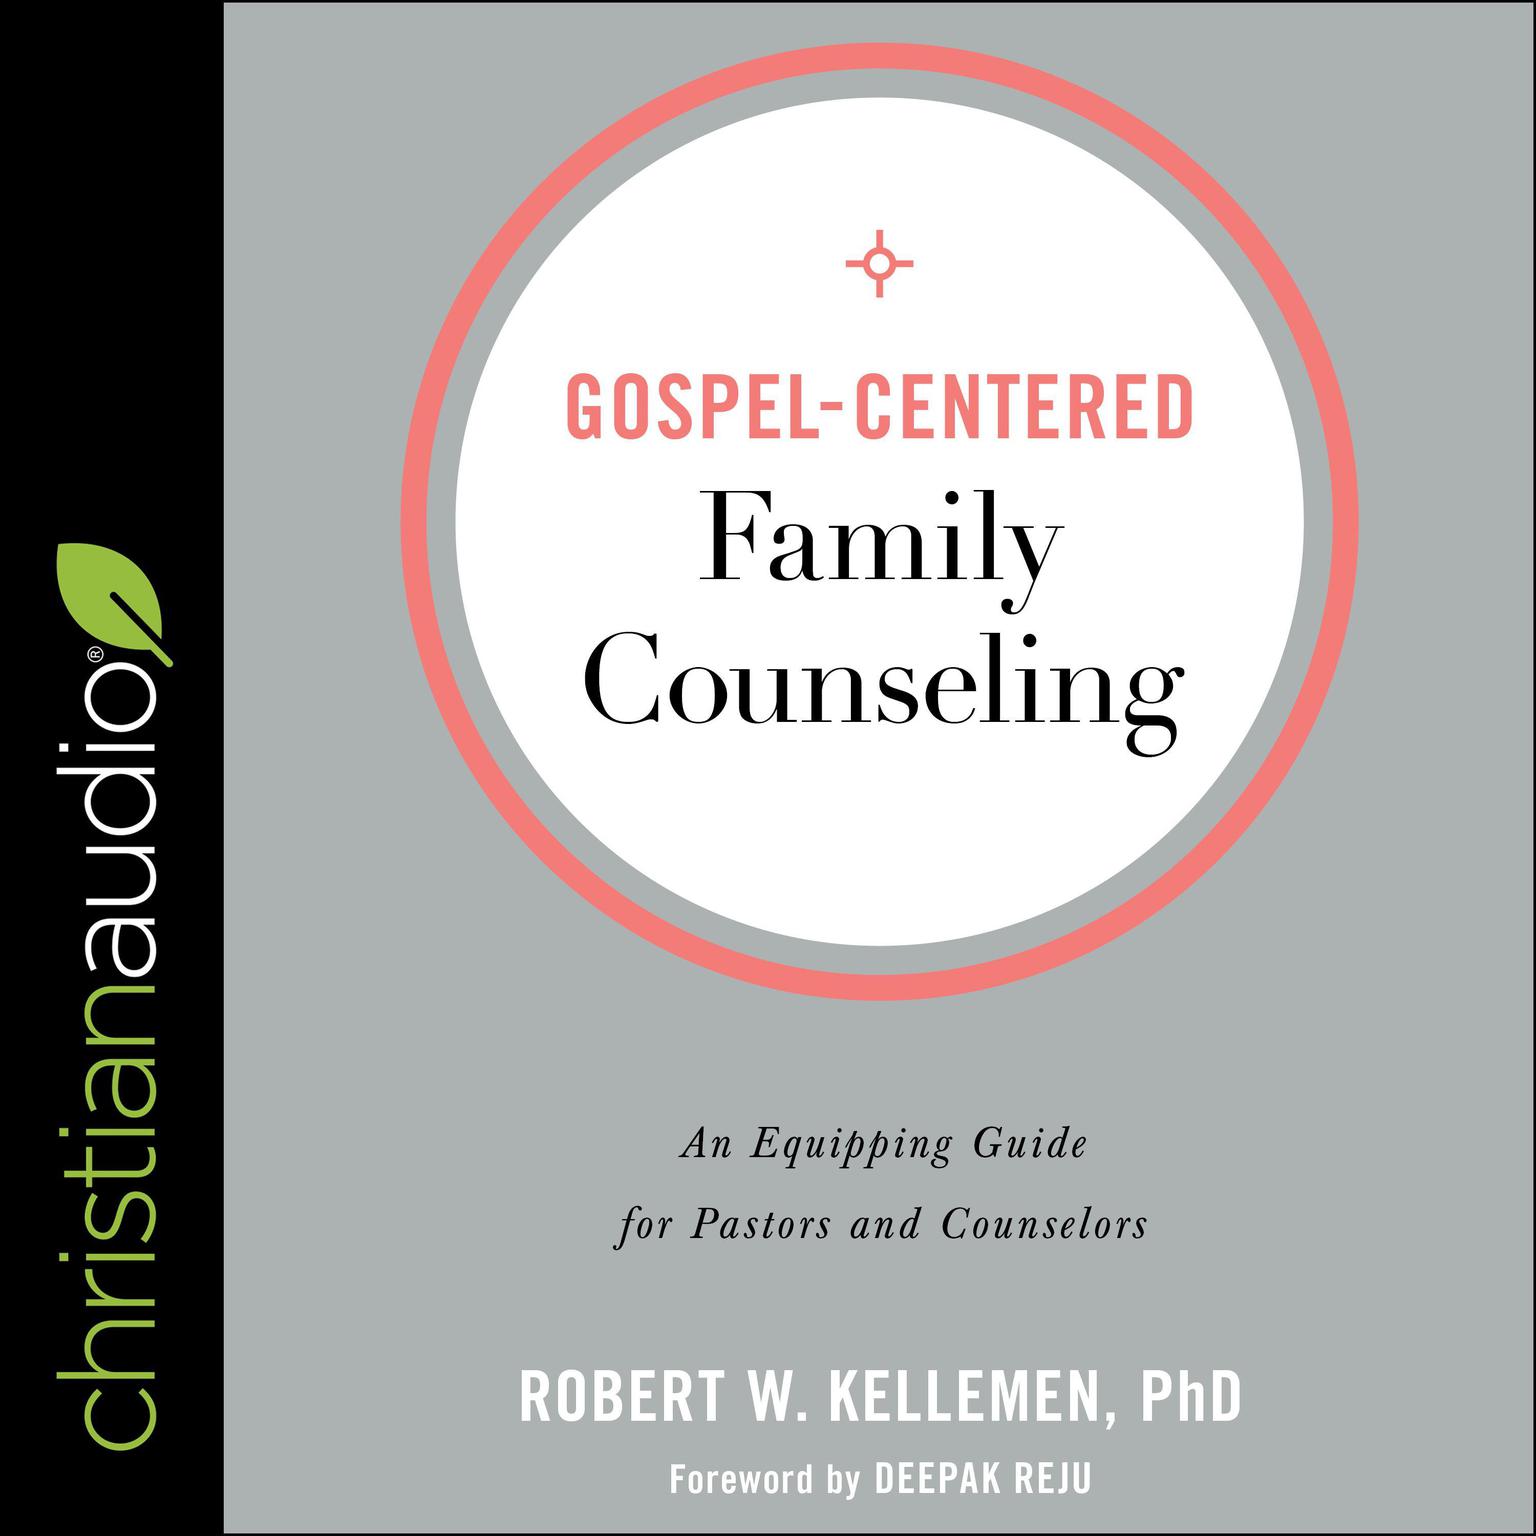 Gospel-Centered Family Counseling: An Equipping Guide for Pastors and Counselors Audiobook, by Robert W. Kelleman